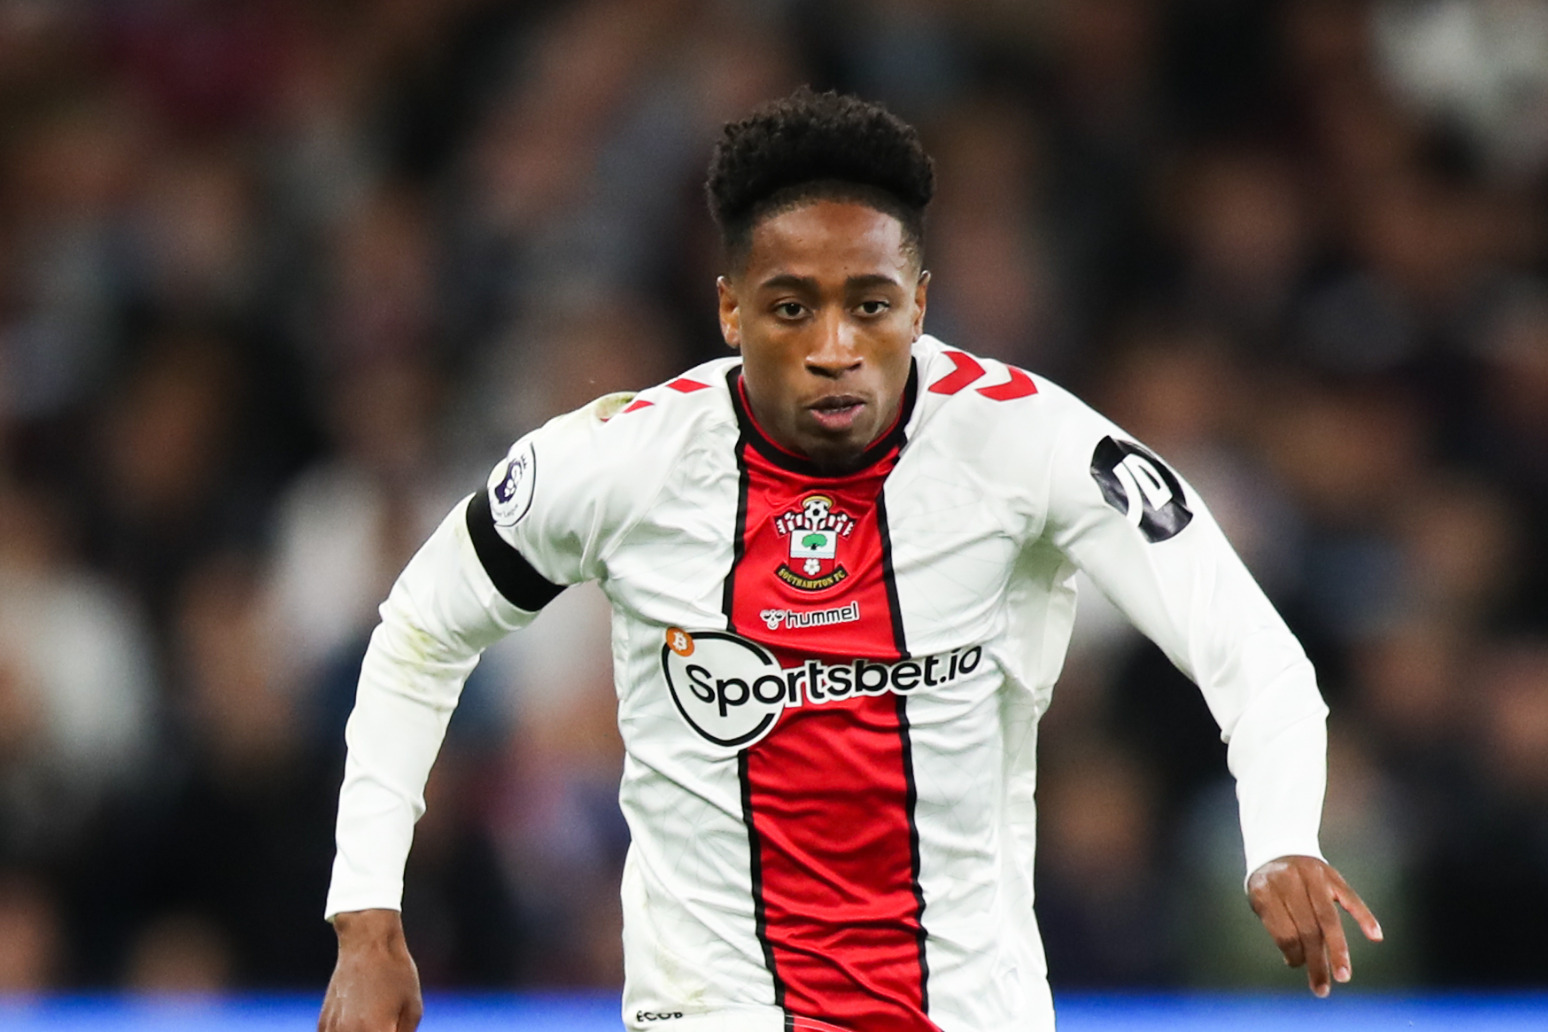 Southampton demand action after racist abuse aimed at Kyle Walker-Peters 